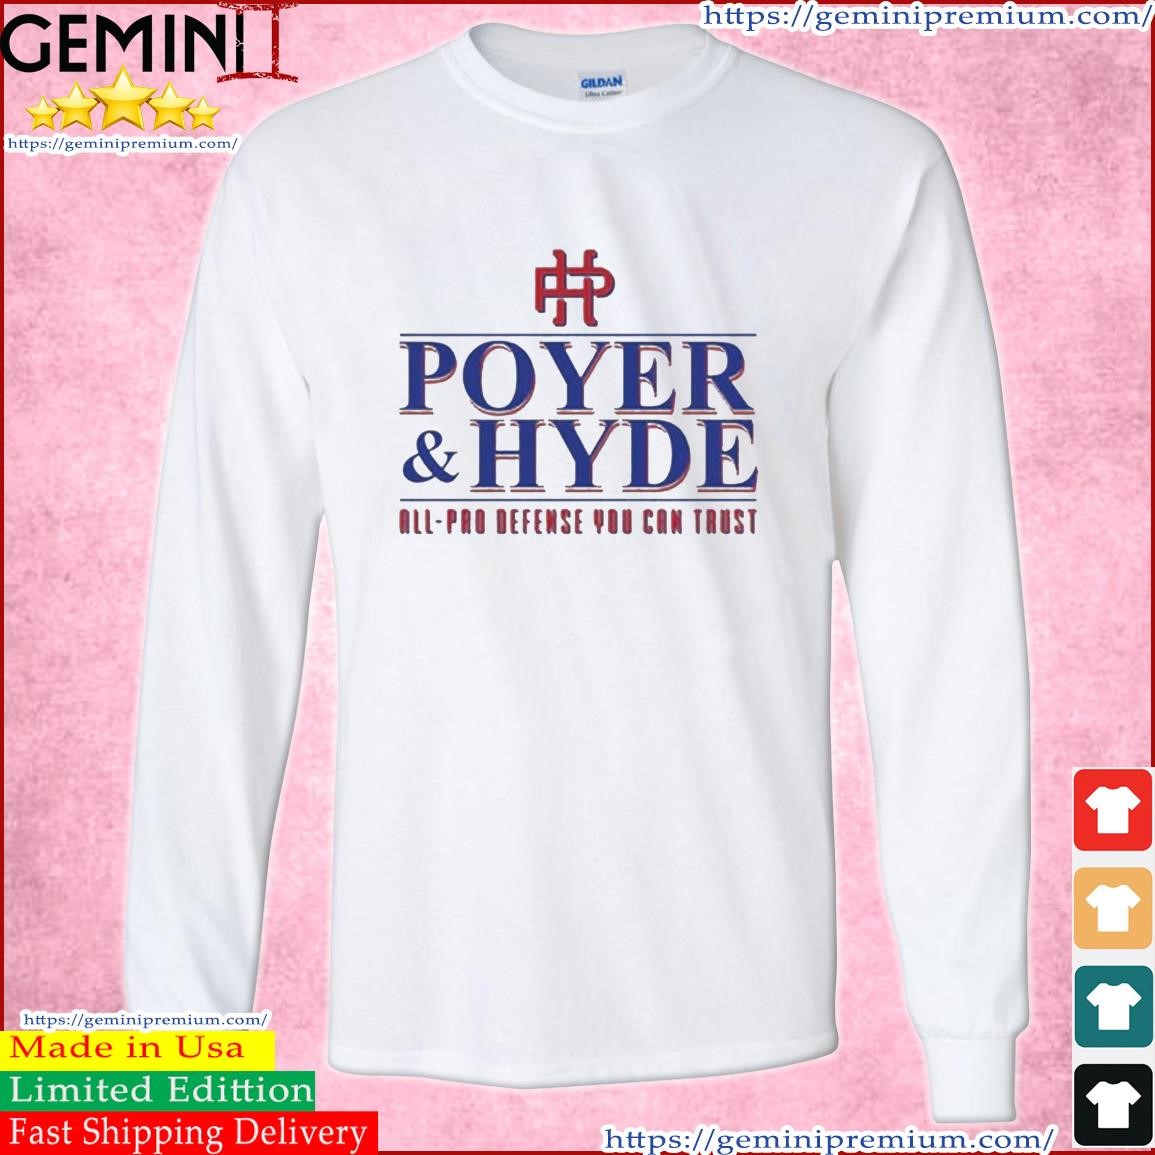 Poyer & Hyde All-pro Defense You Can Trust Shirt Long Sleeve Tee.jpg